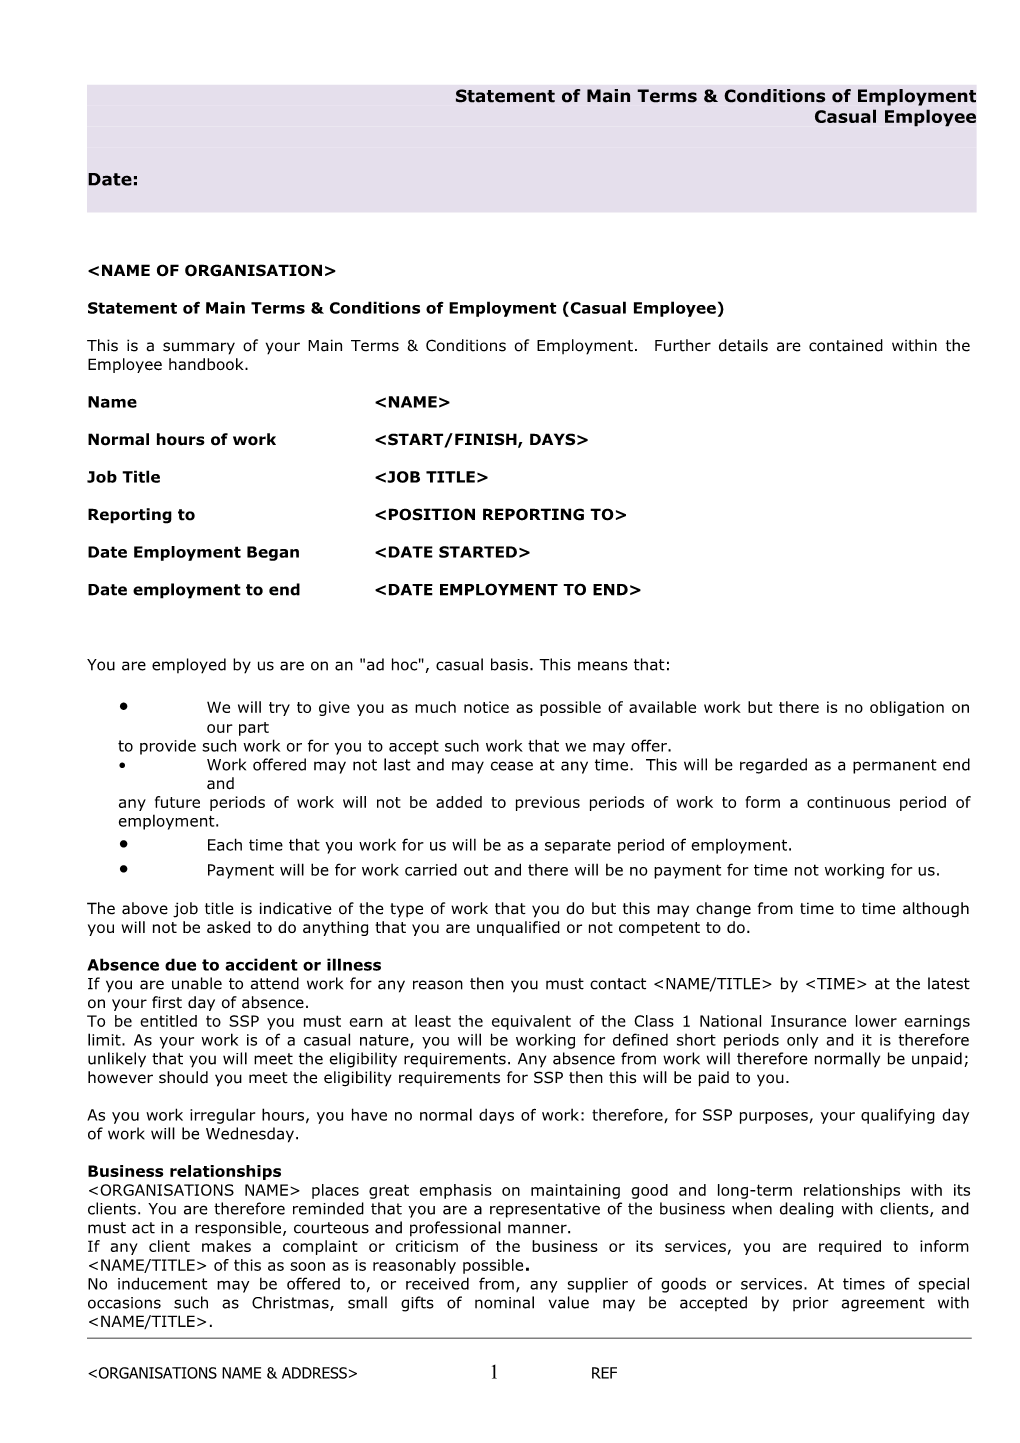 Statement Of Main Terms & Conditions Of Employment